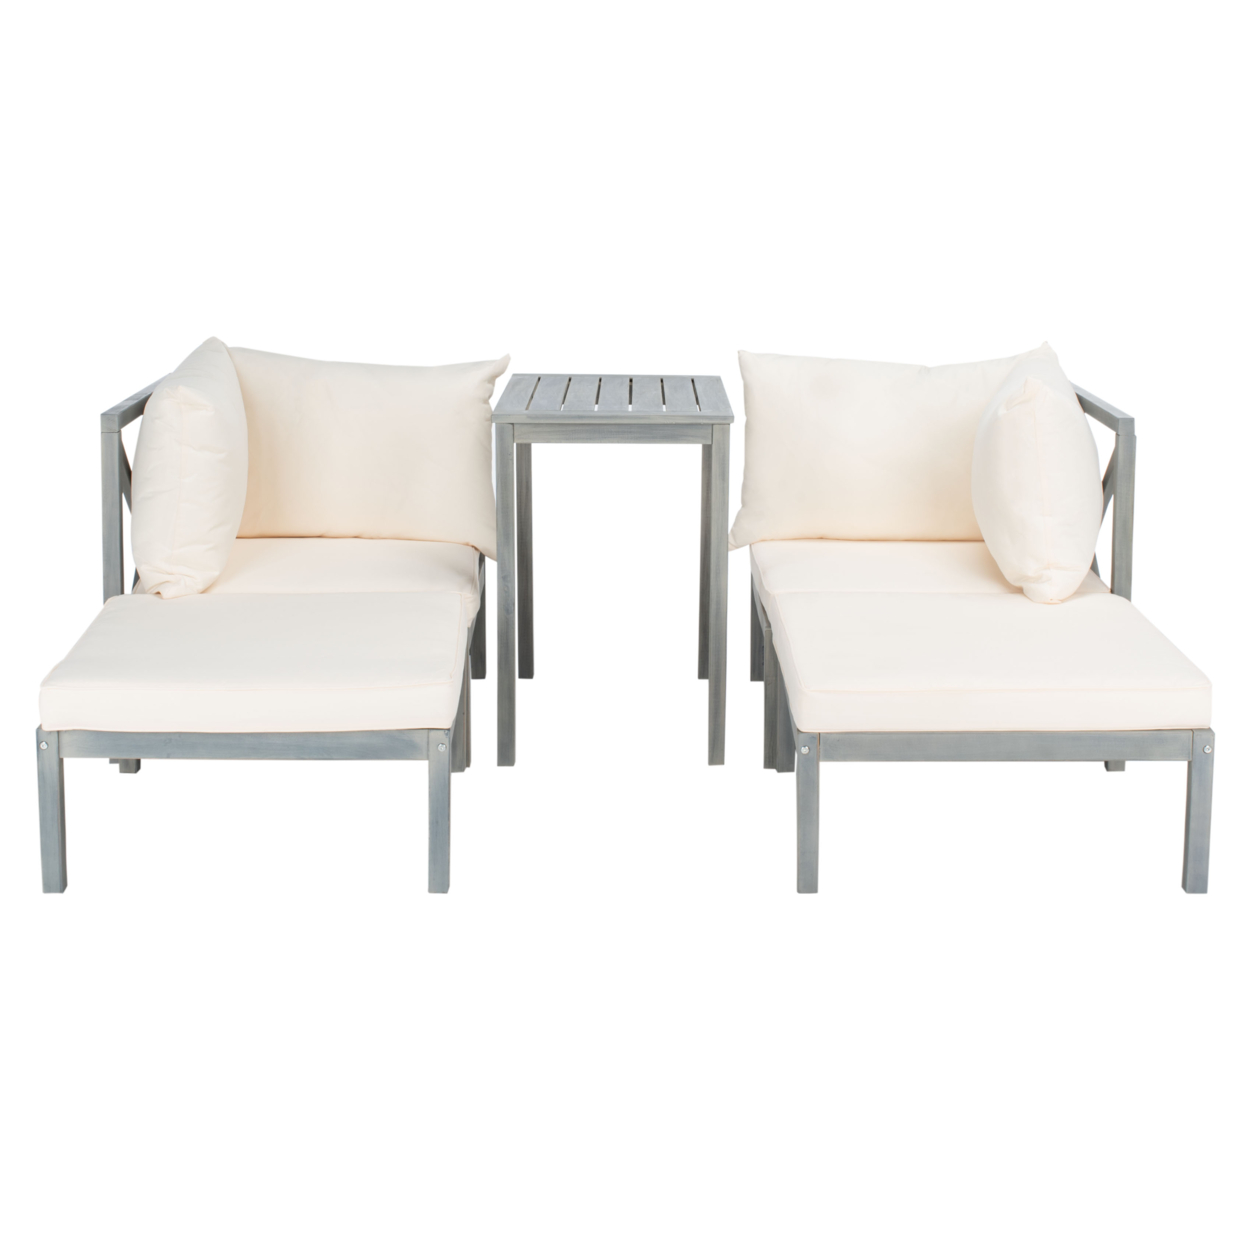 SAFAVIEH Outdoor Collection Ronson 5-Piece Sectional Set Ash Grey/Beige